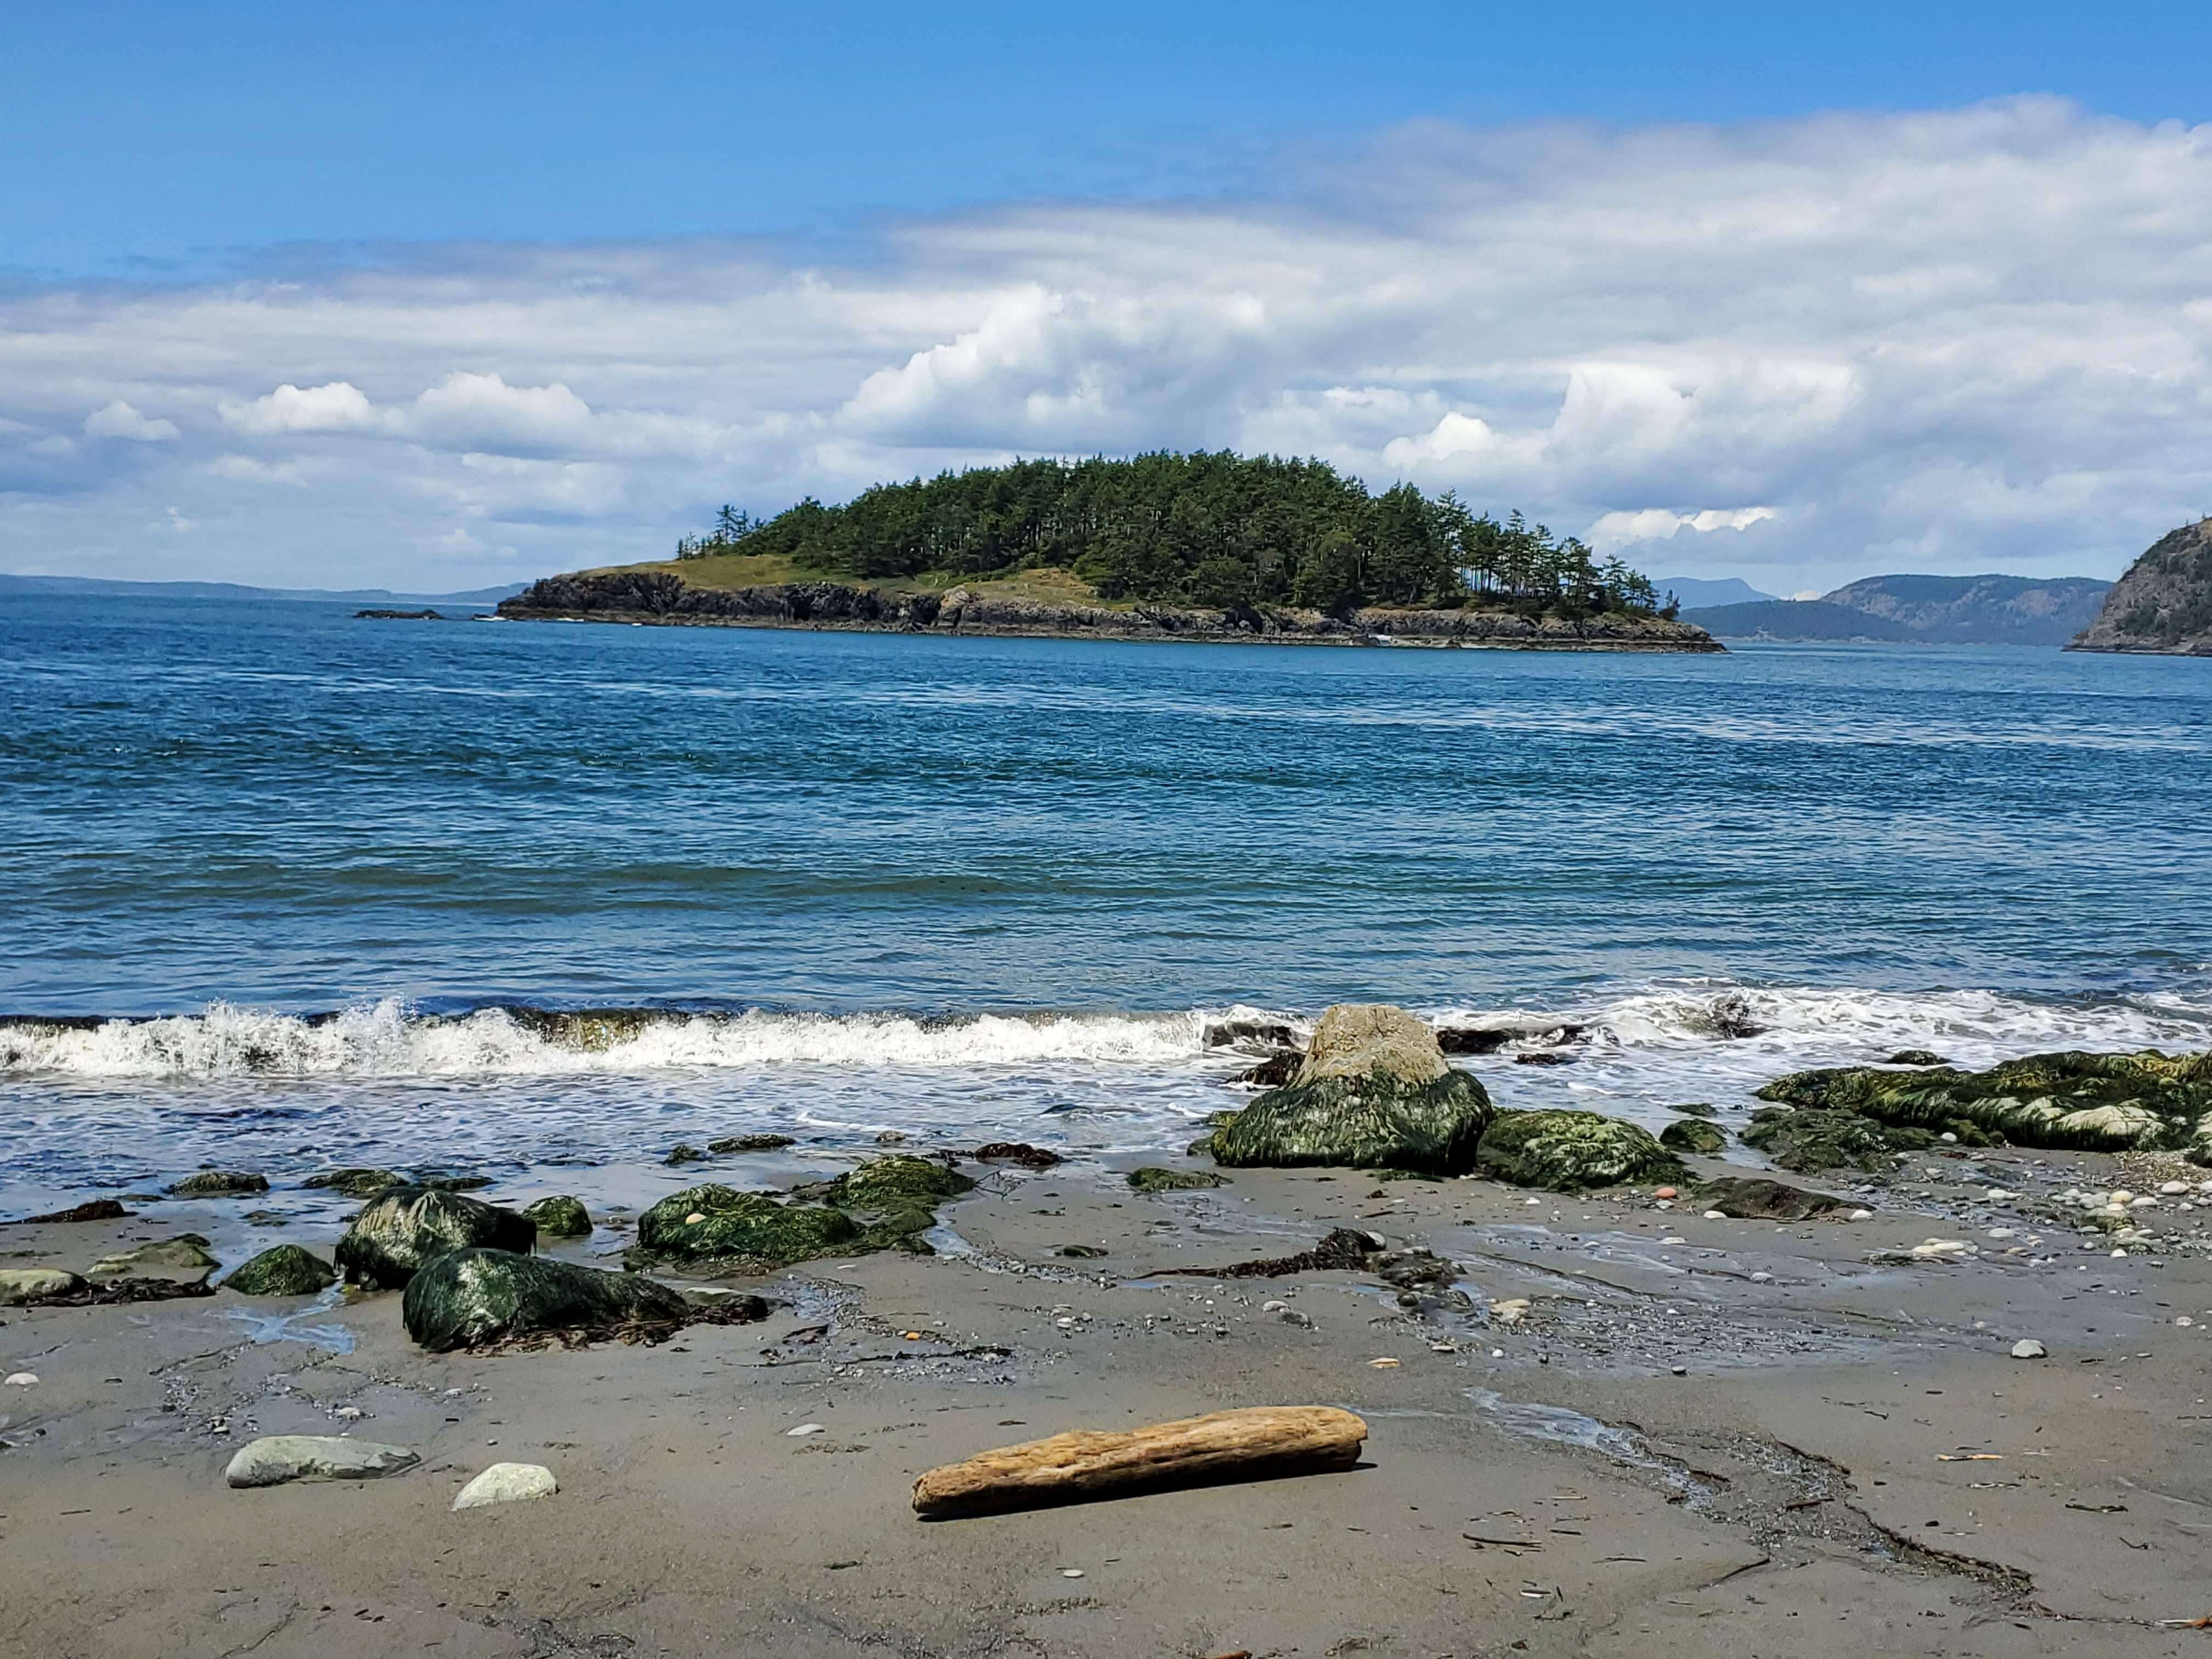 Deception Island as seen from West Beach in Deception Pass State Park